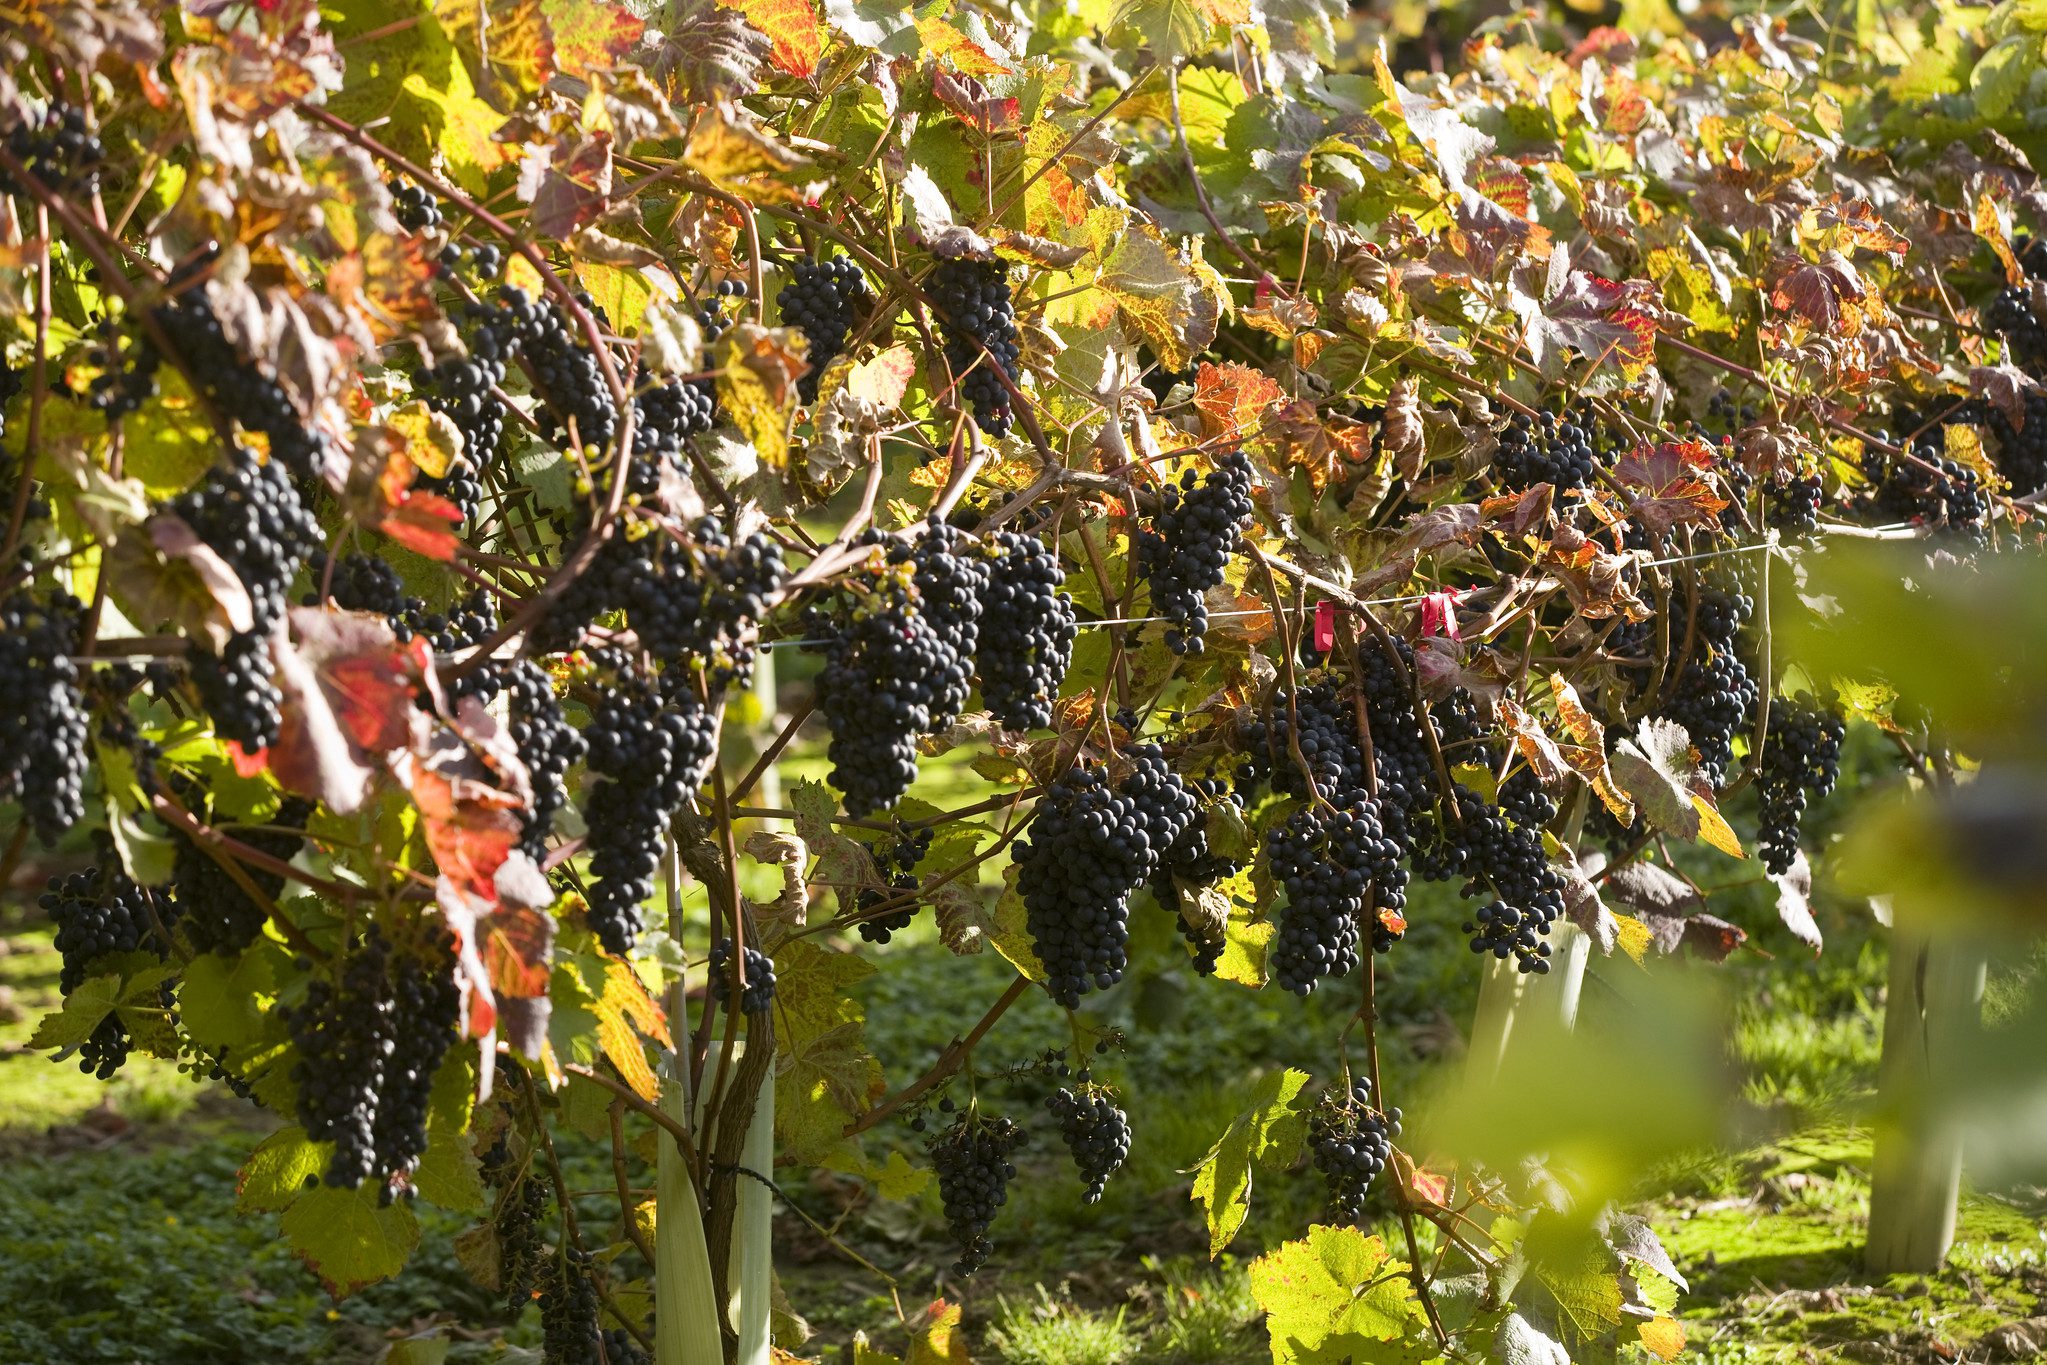 Close up of bunches of black grapes on the vine